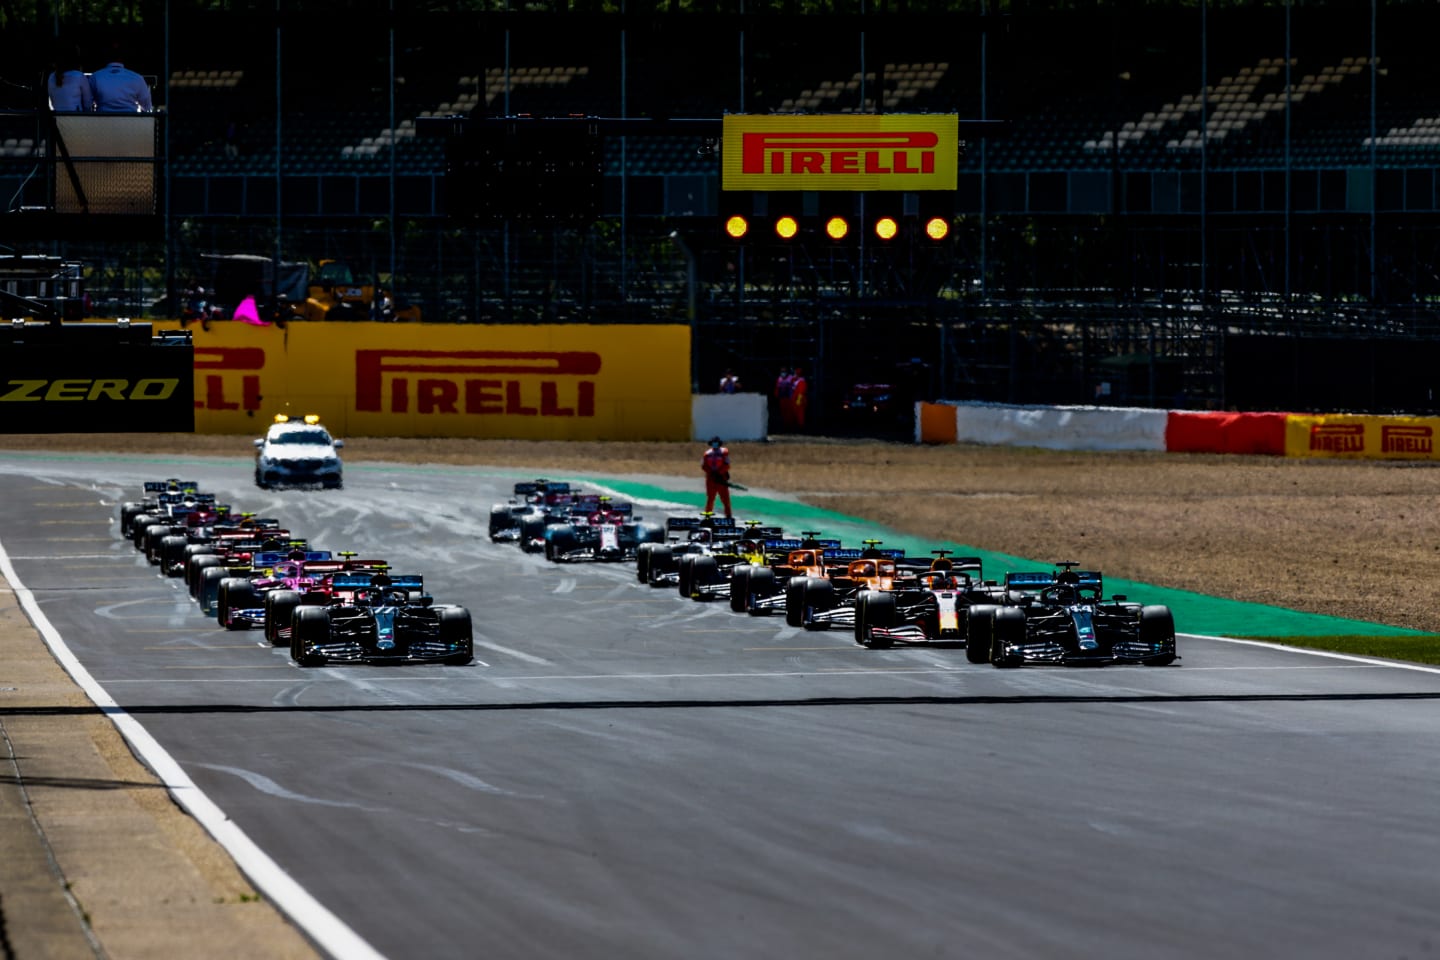 NORTHAMPTON, ENGLAND - AUGUST 02: Start during the F1 Grand Prix of Great Britain at Silverstone on